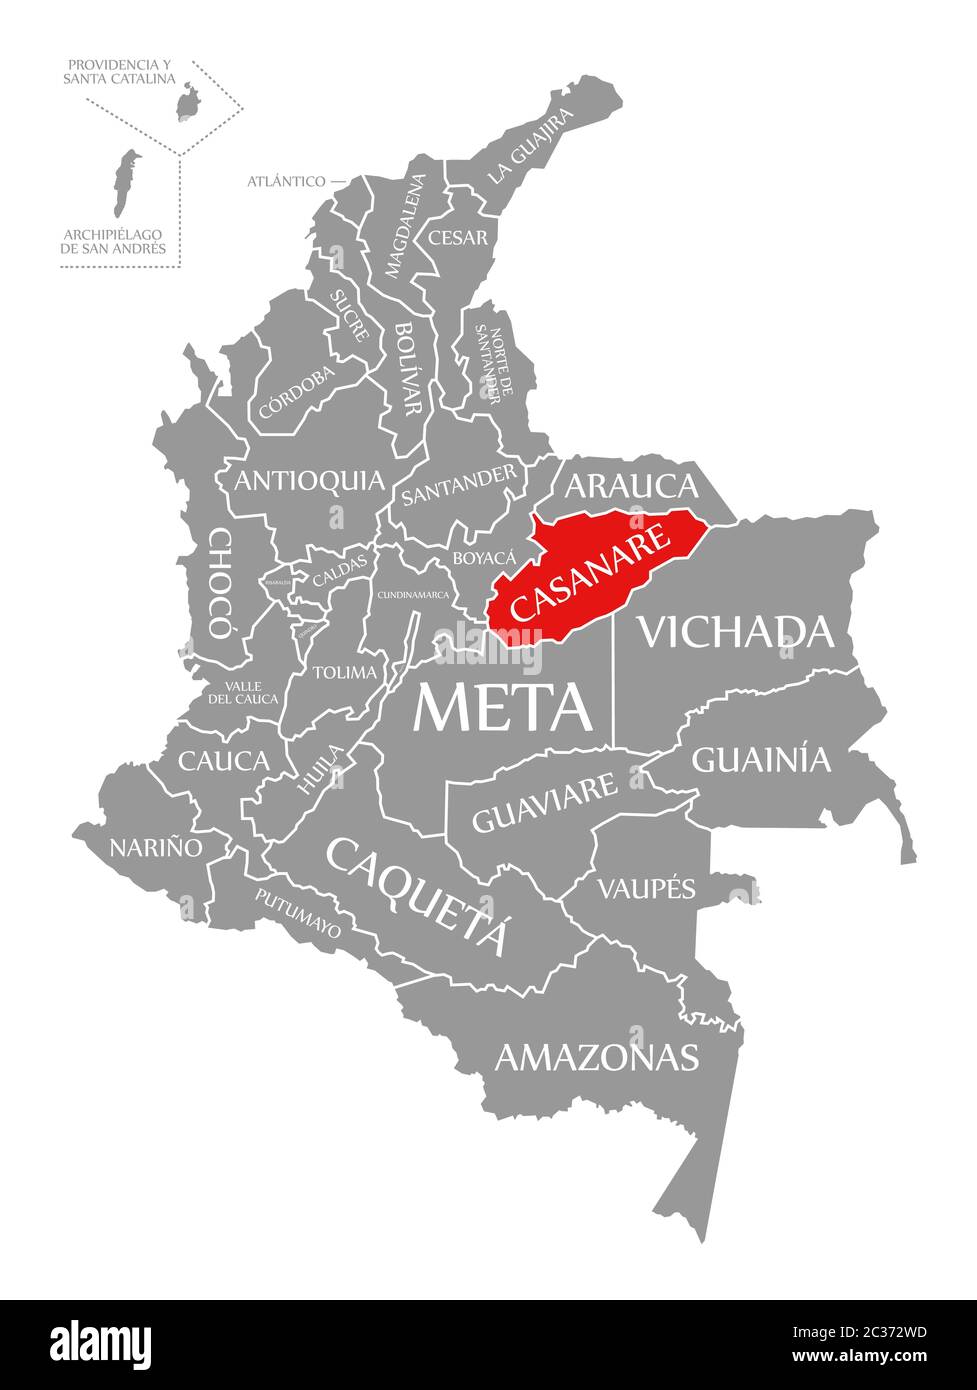 Casanare red highlighted in map of Colombia Stock Photo